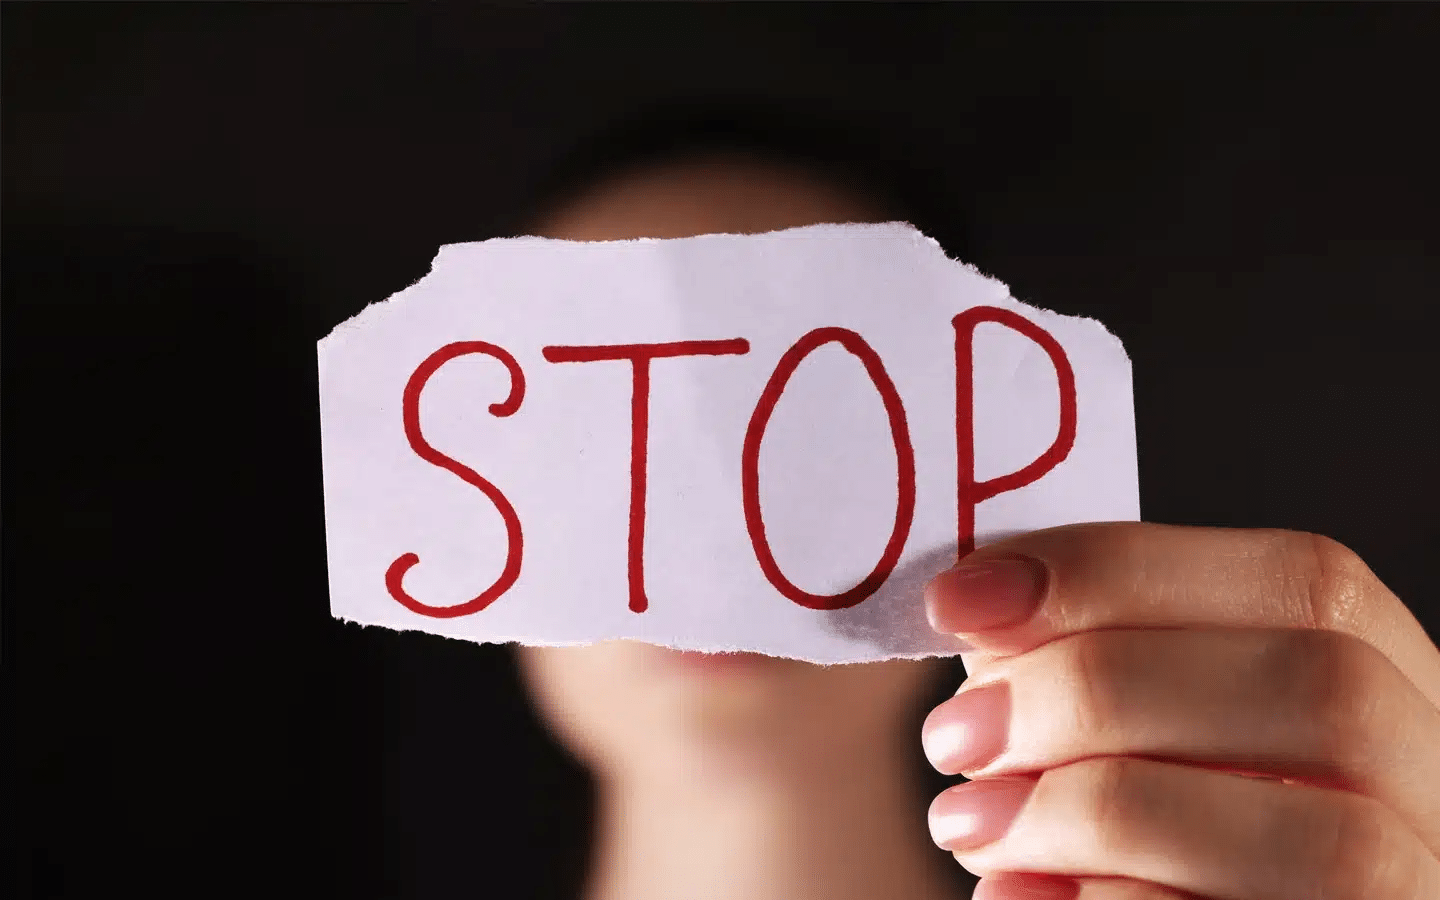 Woman Holding Piece of Paper with Word Stop | Criminal Defense Attorney in LA | Wegman & Levin